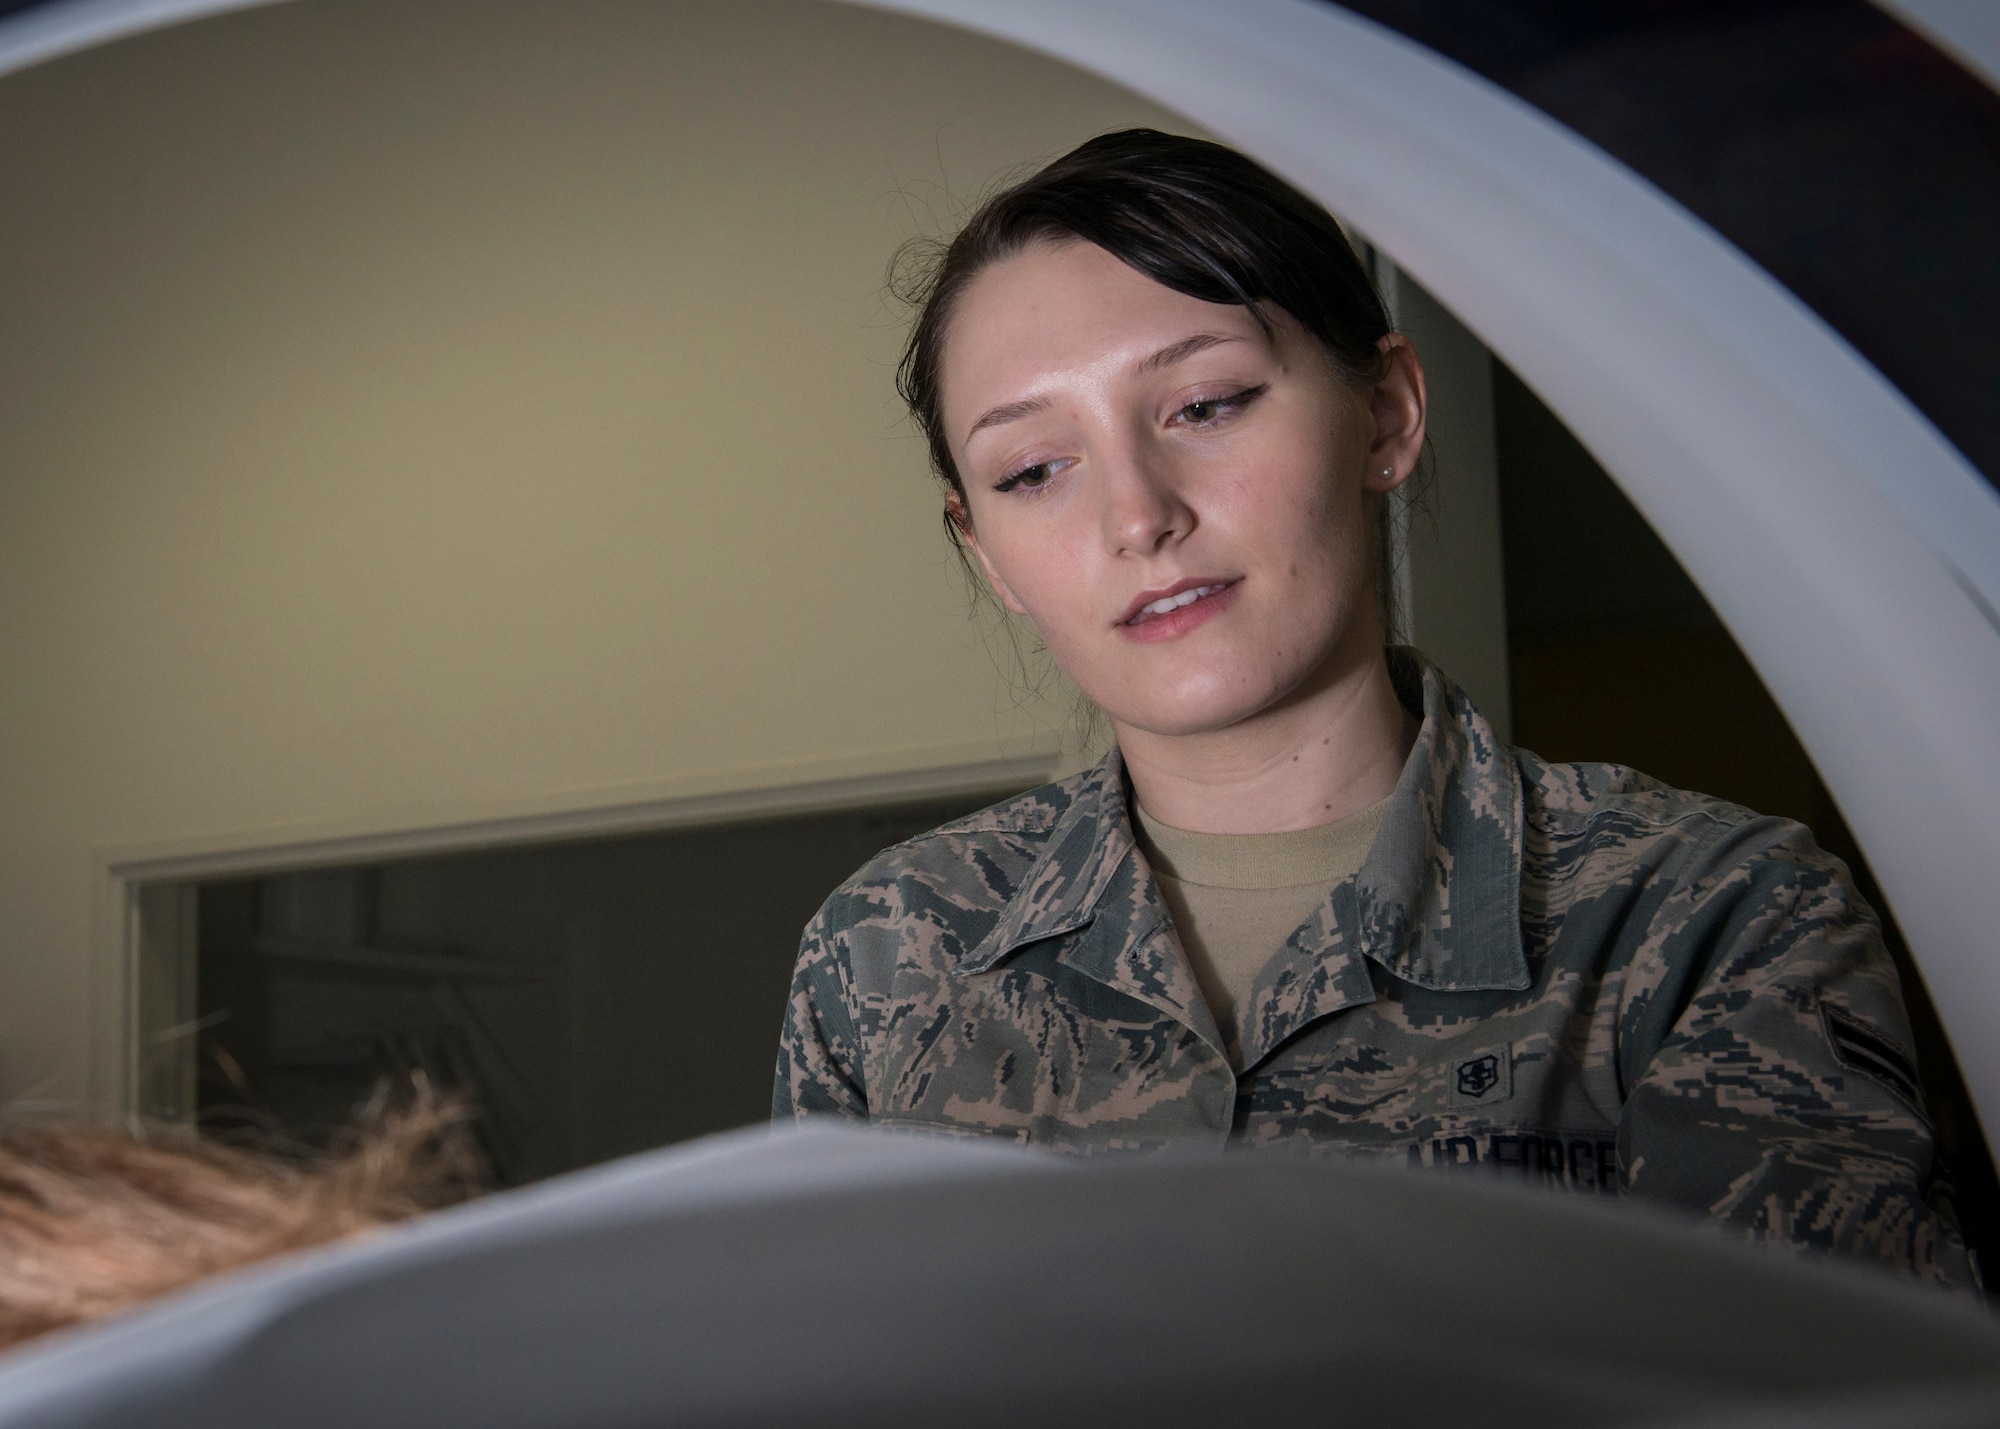 U.S. Air Force Airman 1st Class Samantha Bradford, a diagnostic imaging technologist with the 35th Surgical Operations Squadron, chats with a kidney stone patient as she conducts a computerized tomography scan at Misawa Air Base, Japan, Jan. 27, 2016. Talking with the patient during CT scans alleviates apprehension commonly associated with the procedure. Bradford is a Corinth, Maine, native. (U.S. Air Force photo by Staff Sgt. Benjamin W. Stratton)